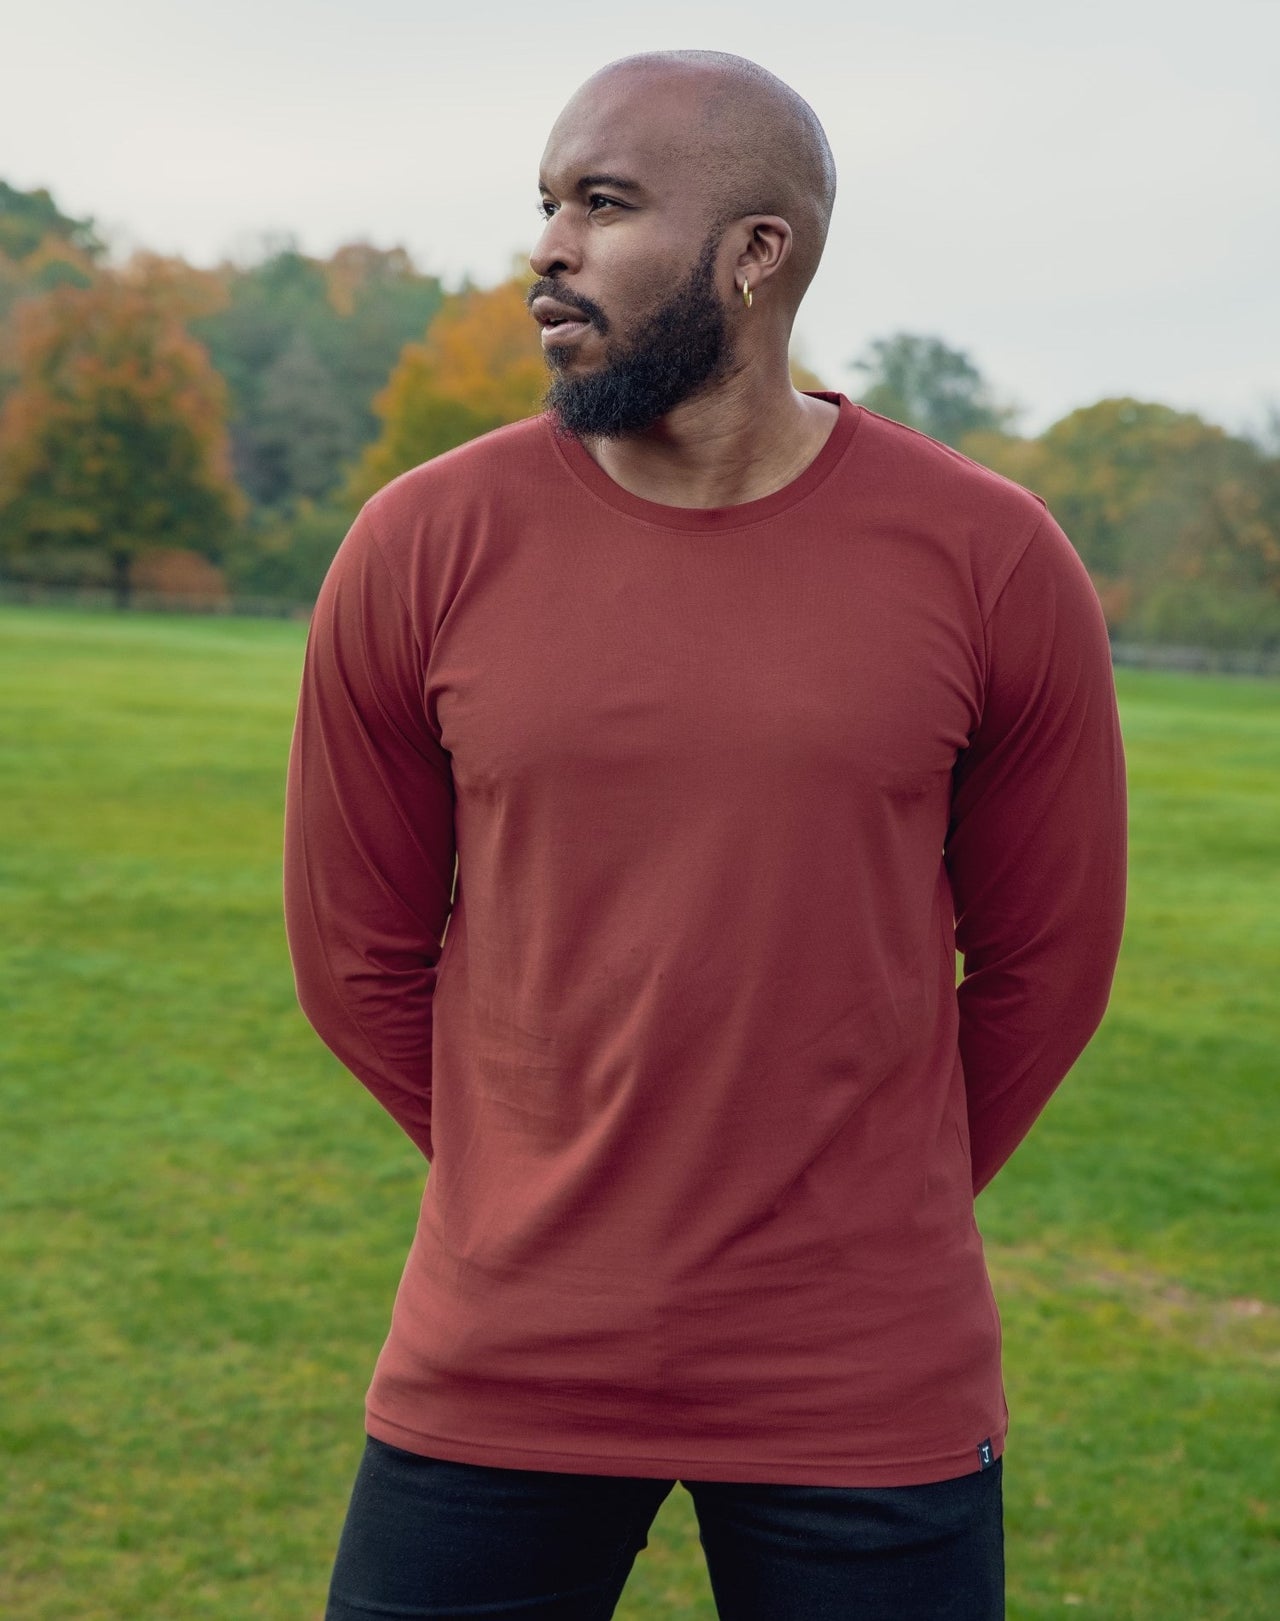 A shot of a tall athletic guy in a park wearing a dark orange long sleeve tall t-shirt, looking to the right.